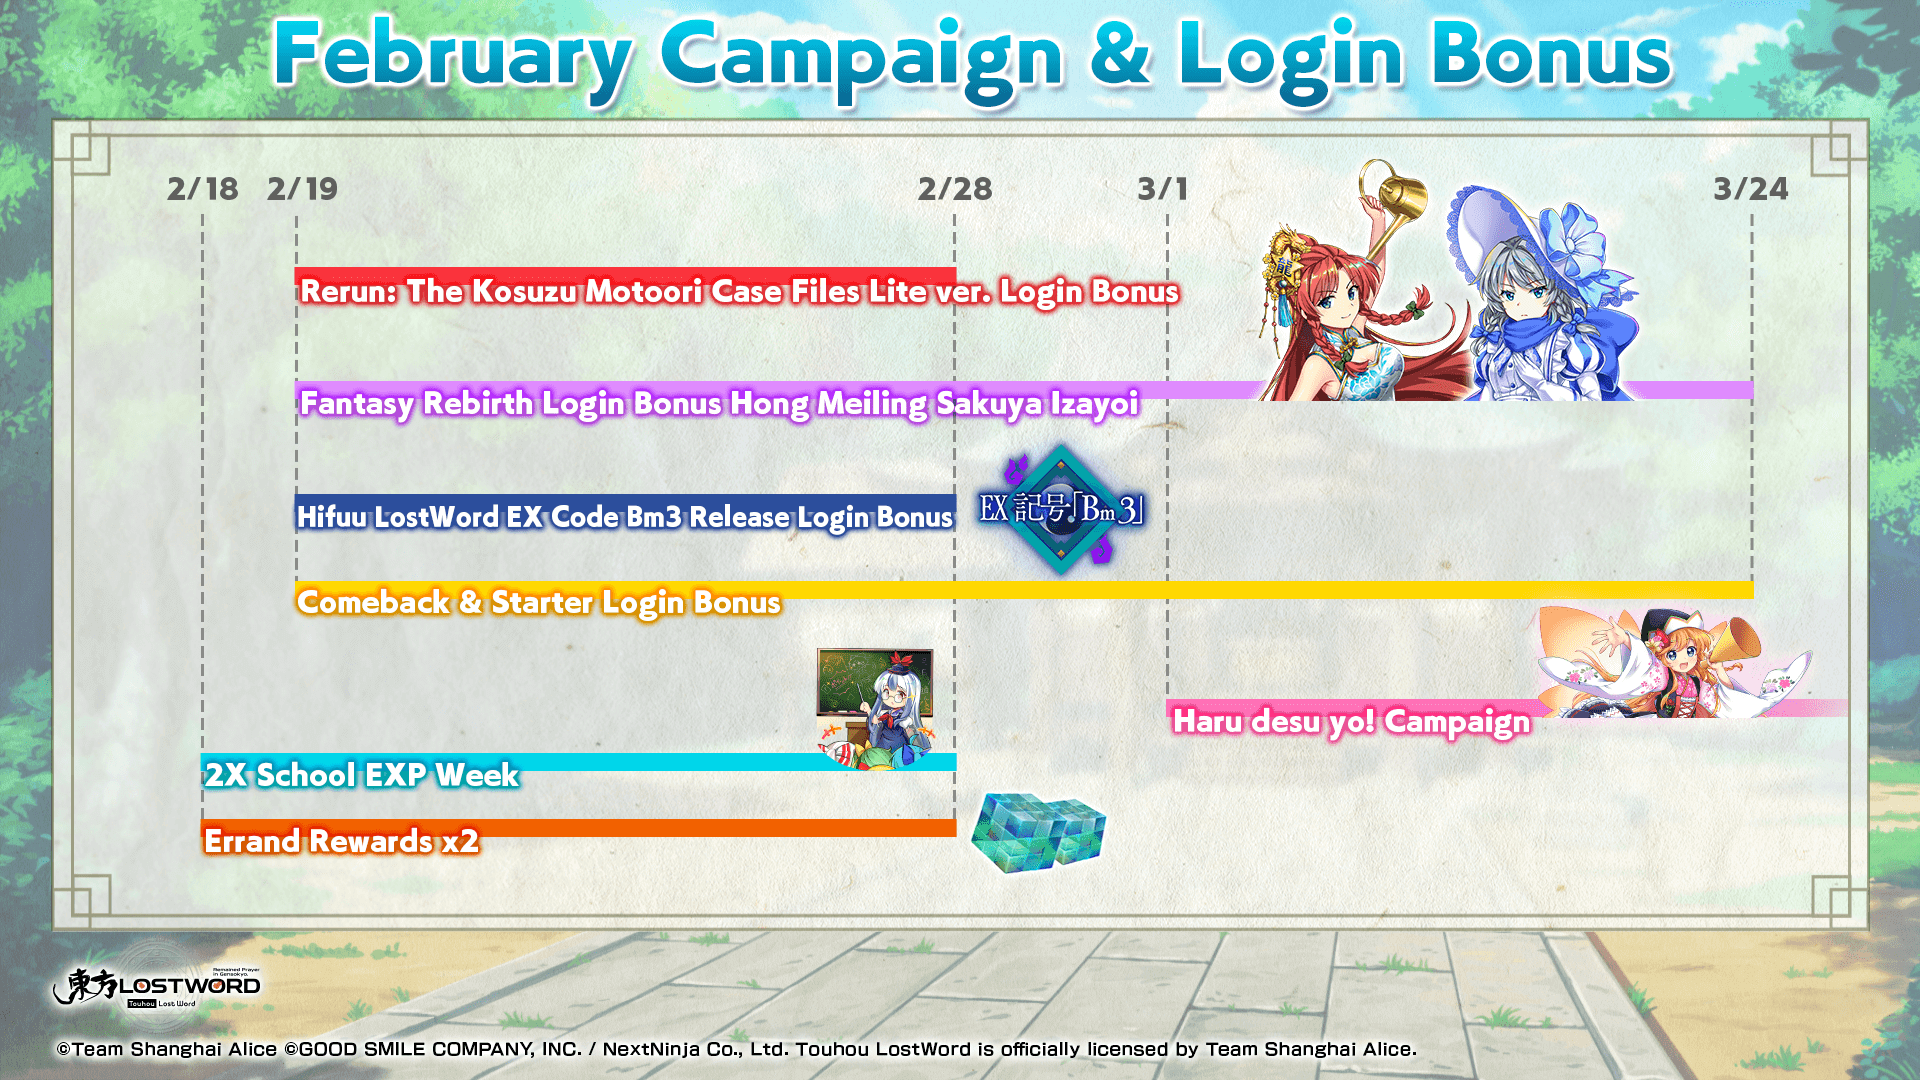 February Campaign and Login